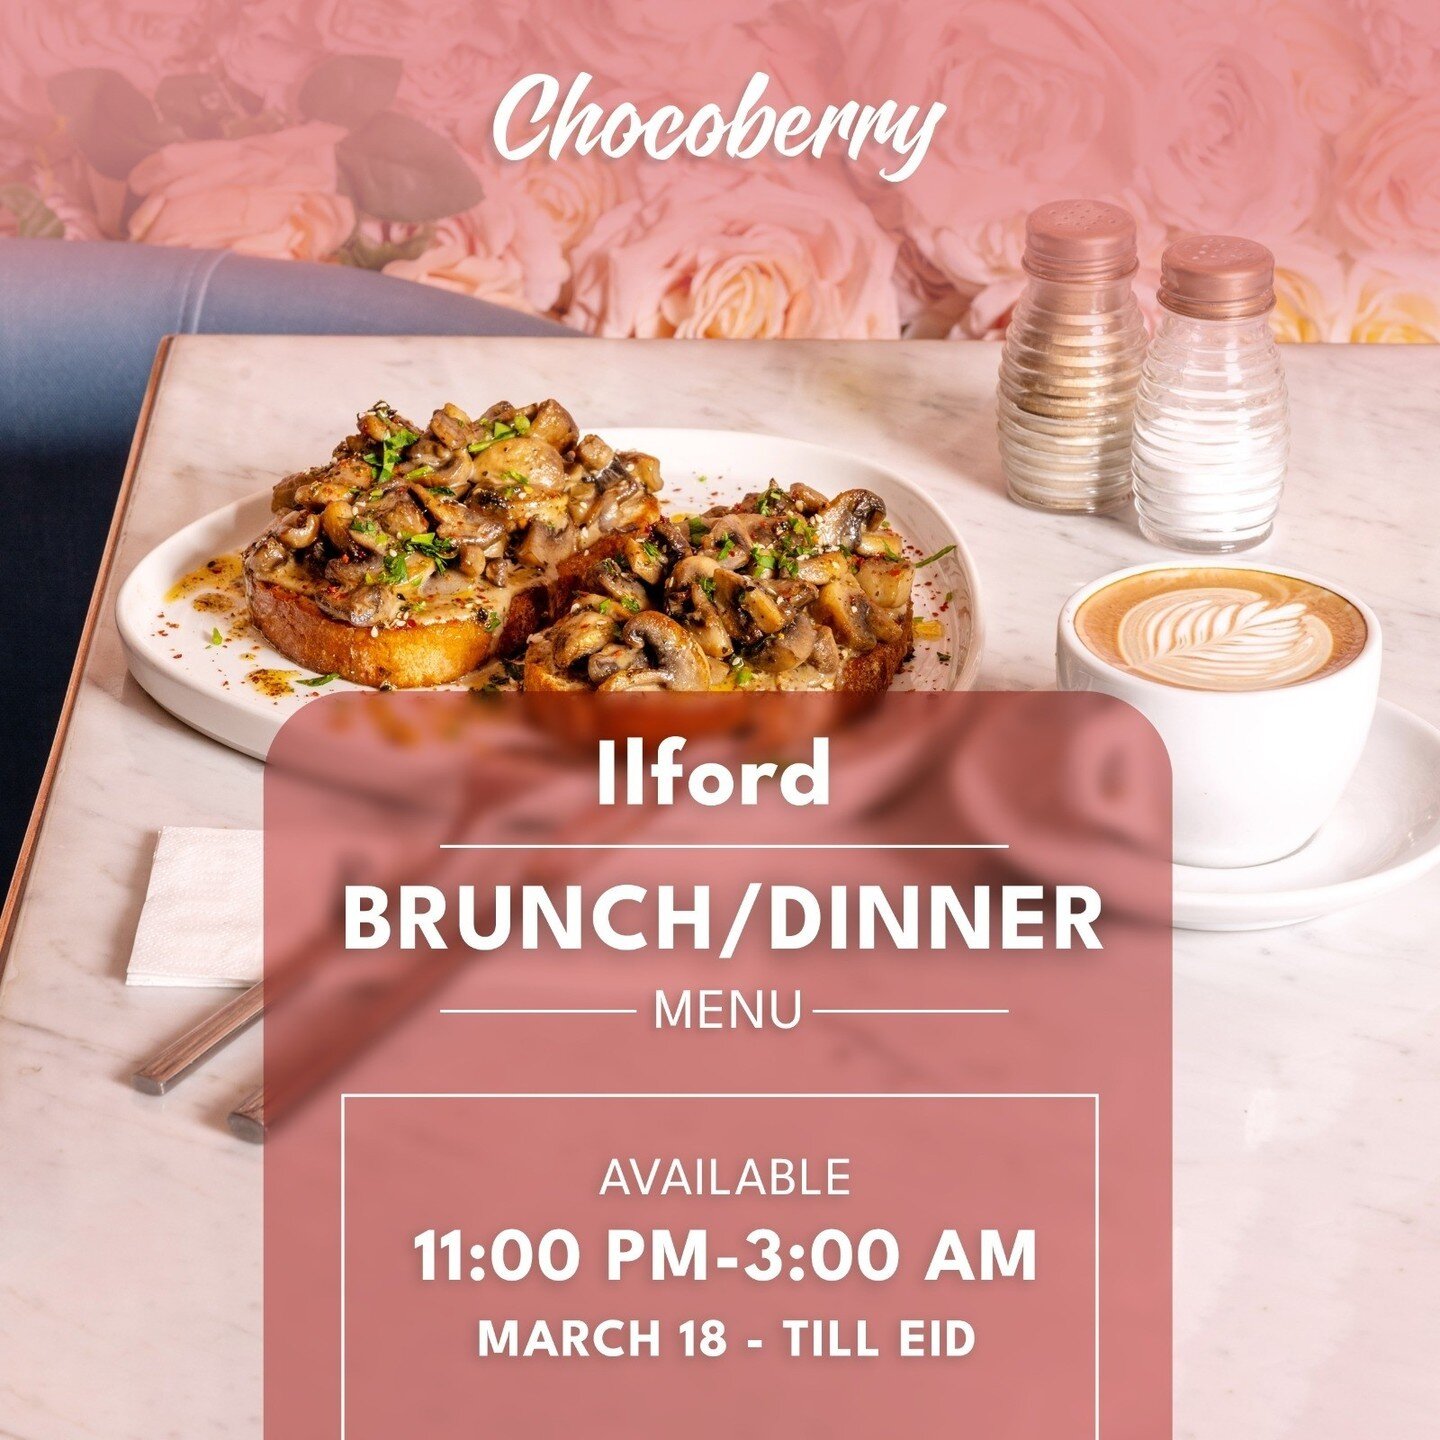 Ramadan Kareem! 🌙 From today, we're extending our hours to serve you better during this special time. Join us from 11 PM to 3 AM throughout Ramadan at Ilford Chocoberry. Wishing you peace, blessings, and good health. ⁠
⁠
Available at Ilford Chocober